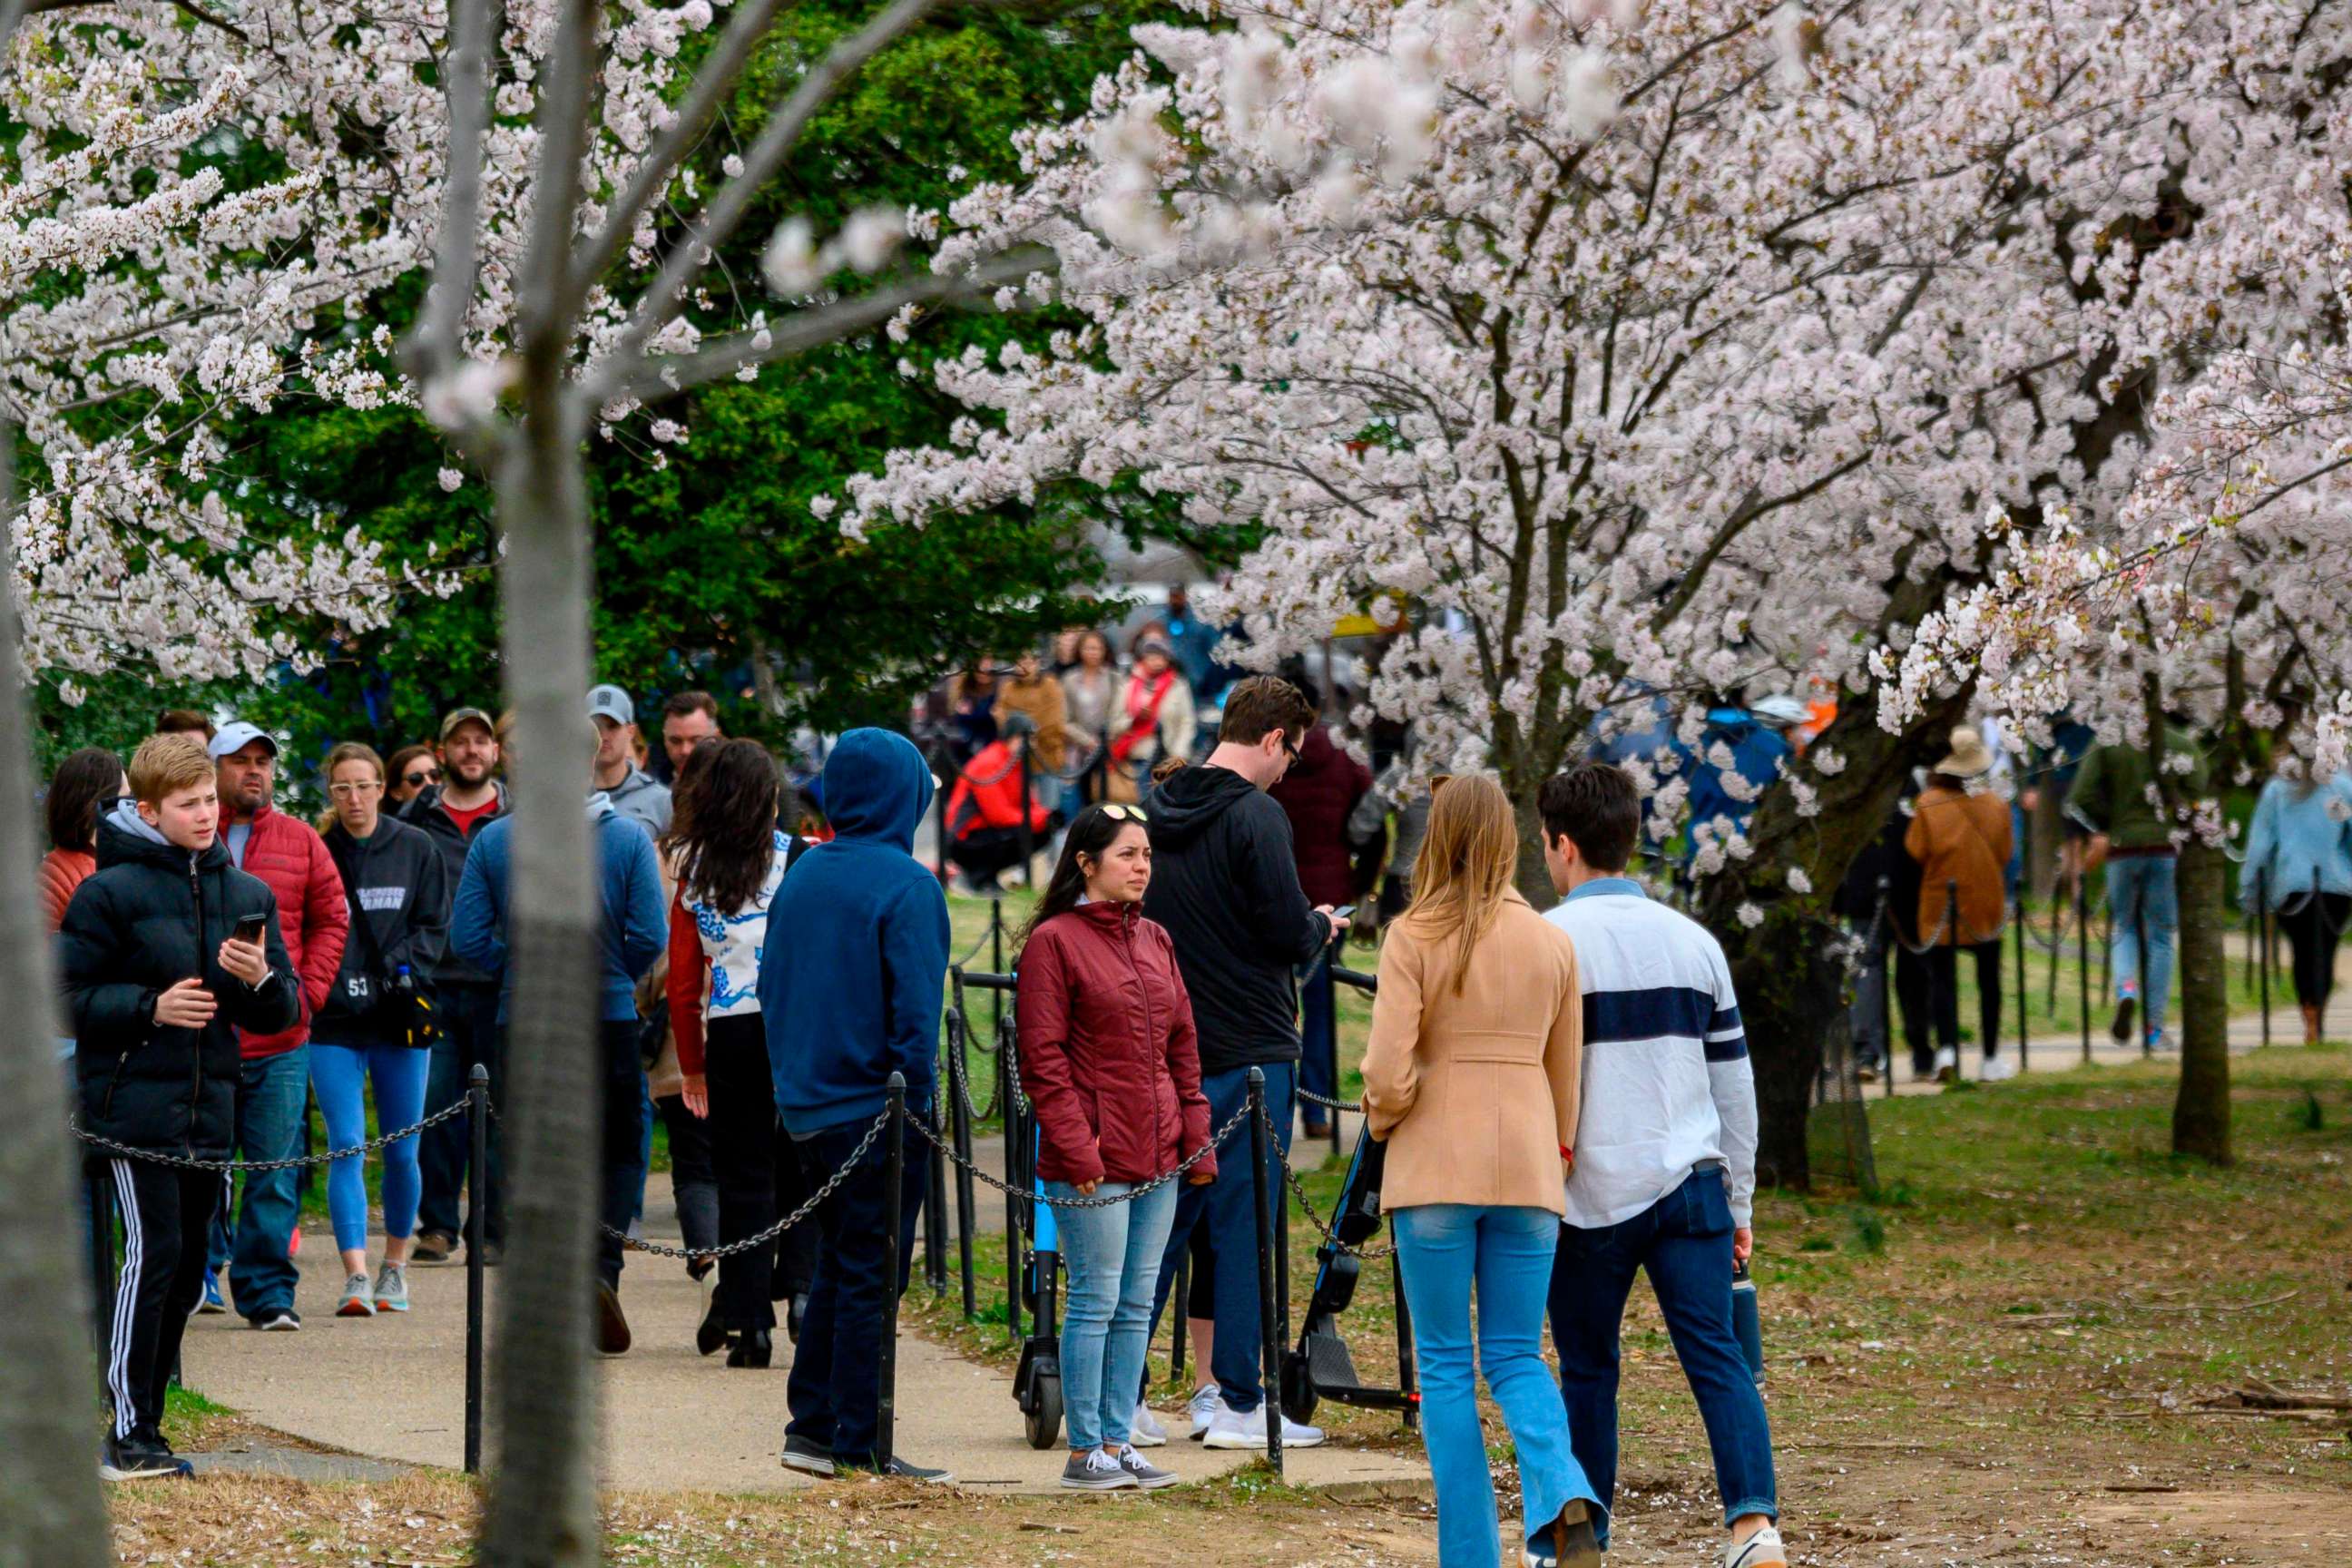 PHOTO: Locals and tourists walk around the tidal basin to see this years cherry blossoms despite the outbreak of novel coronavirus and the social distancing recommendations by the authorities on March 21, 2020, in Washington.